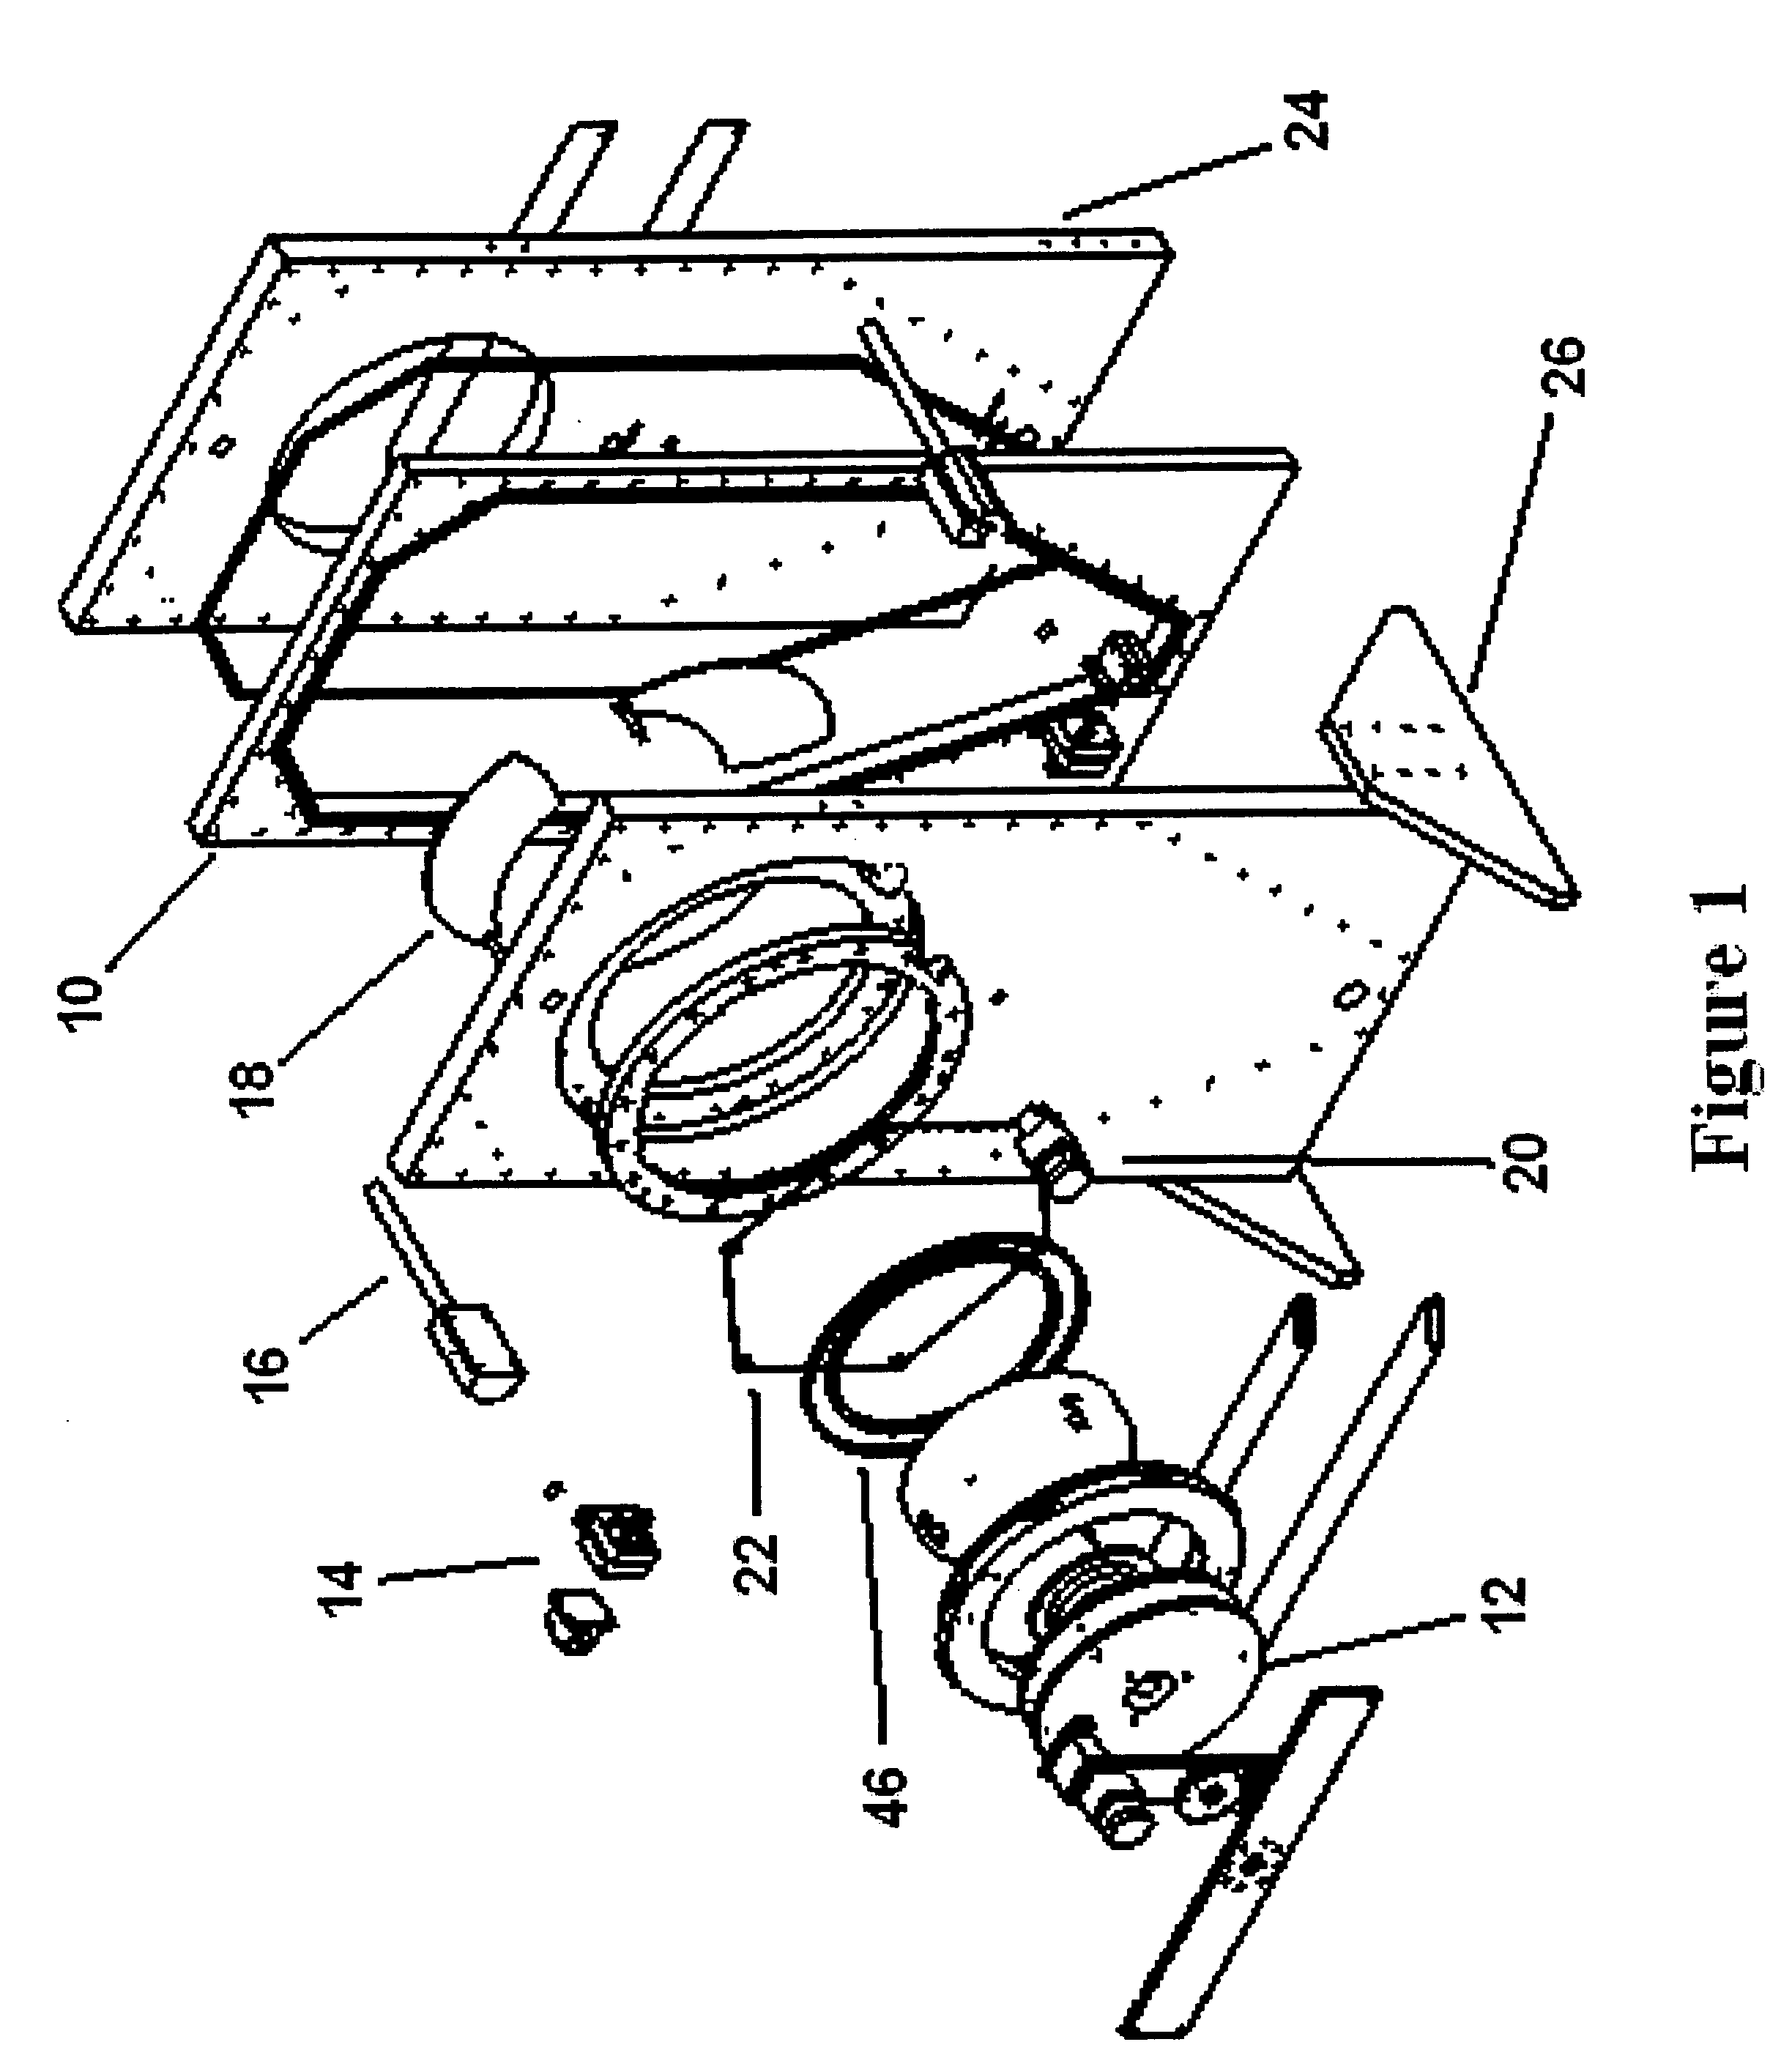 Apparatus and method for highly controlled electrodeposition